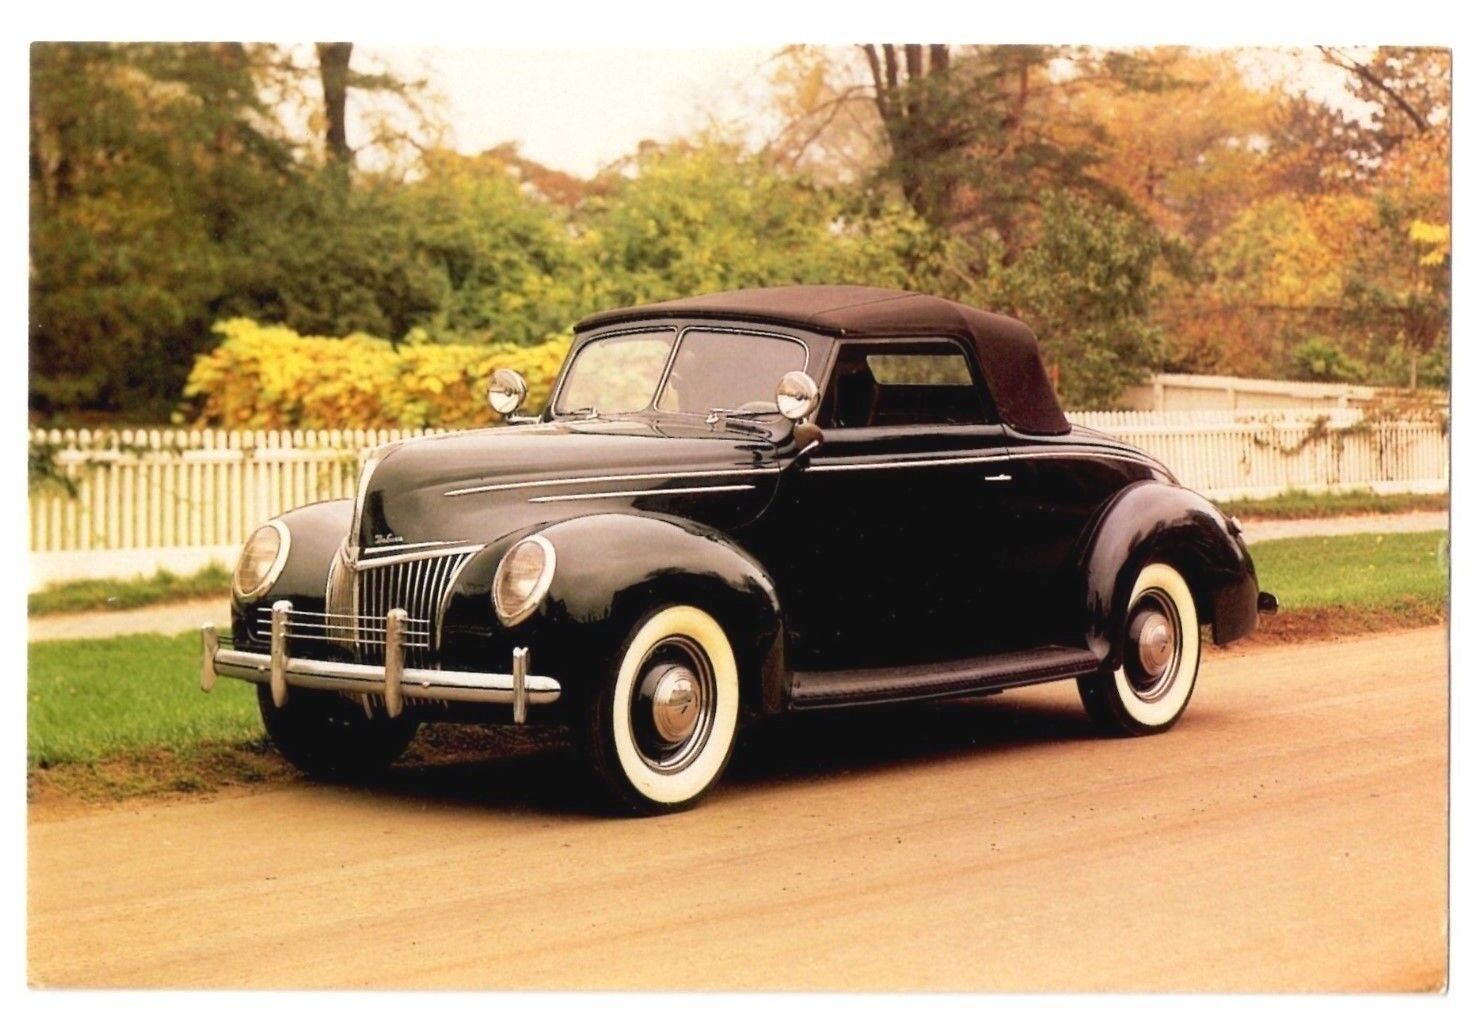 Ford 1939 New Convertible Coupe Photograph Henry Ford Museum Dearborn, Michigan